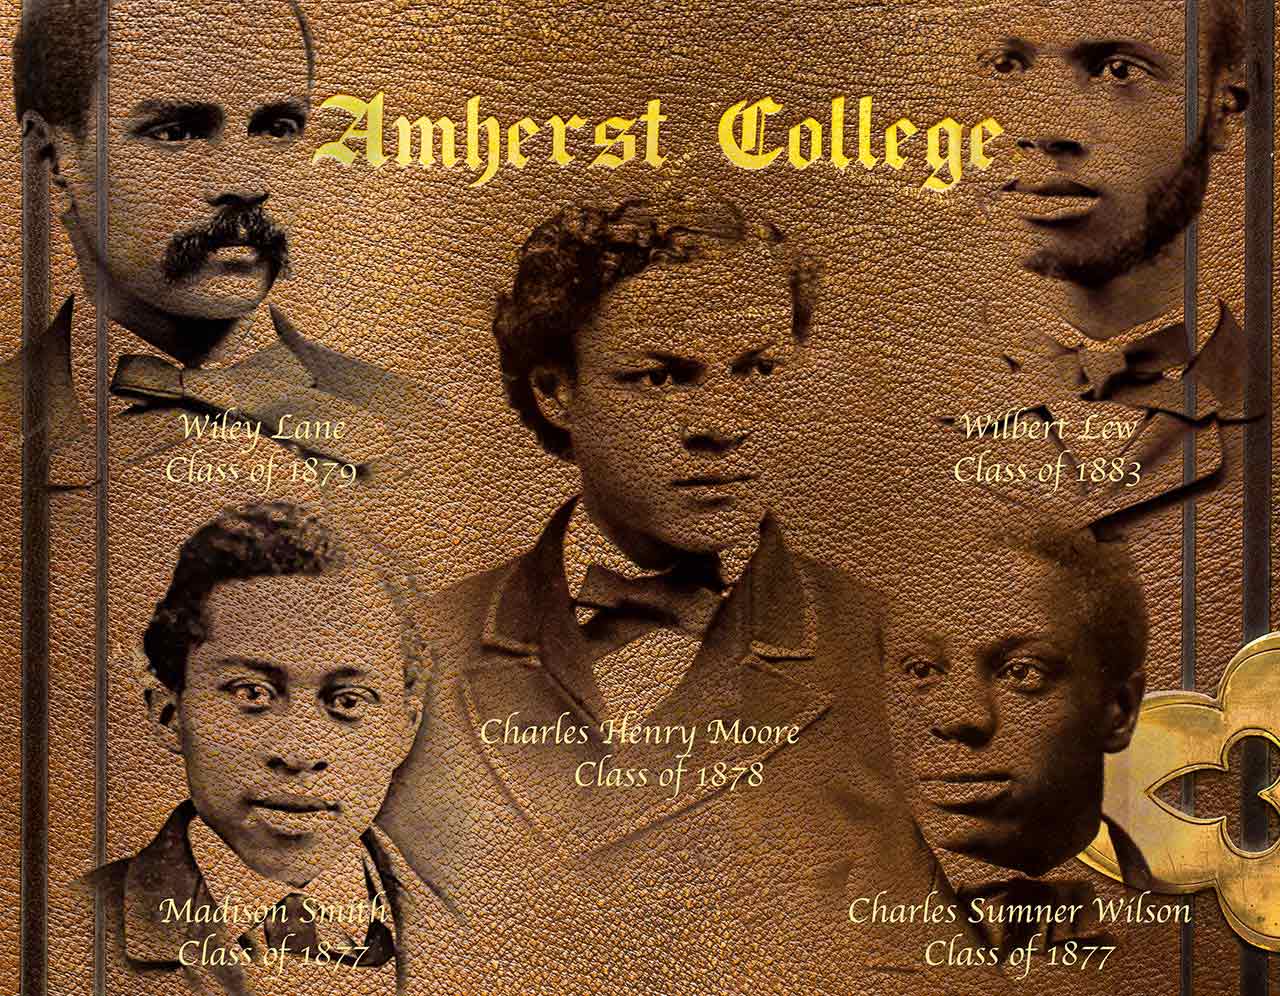 Cover of an Amherst College year book with portraits of five students superimposed on the cover